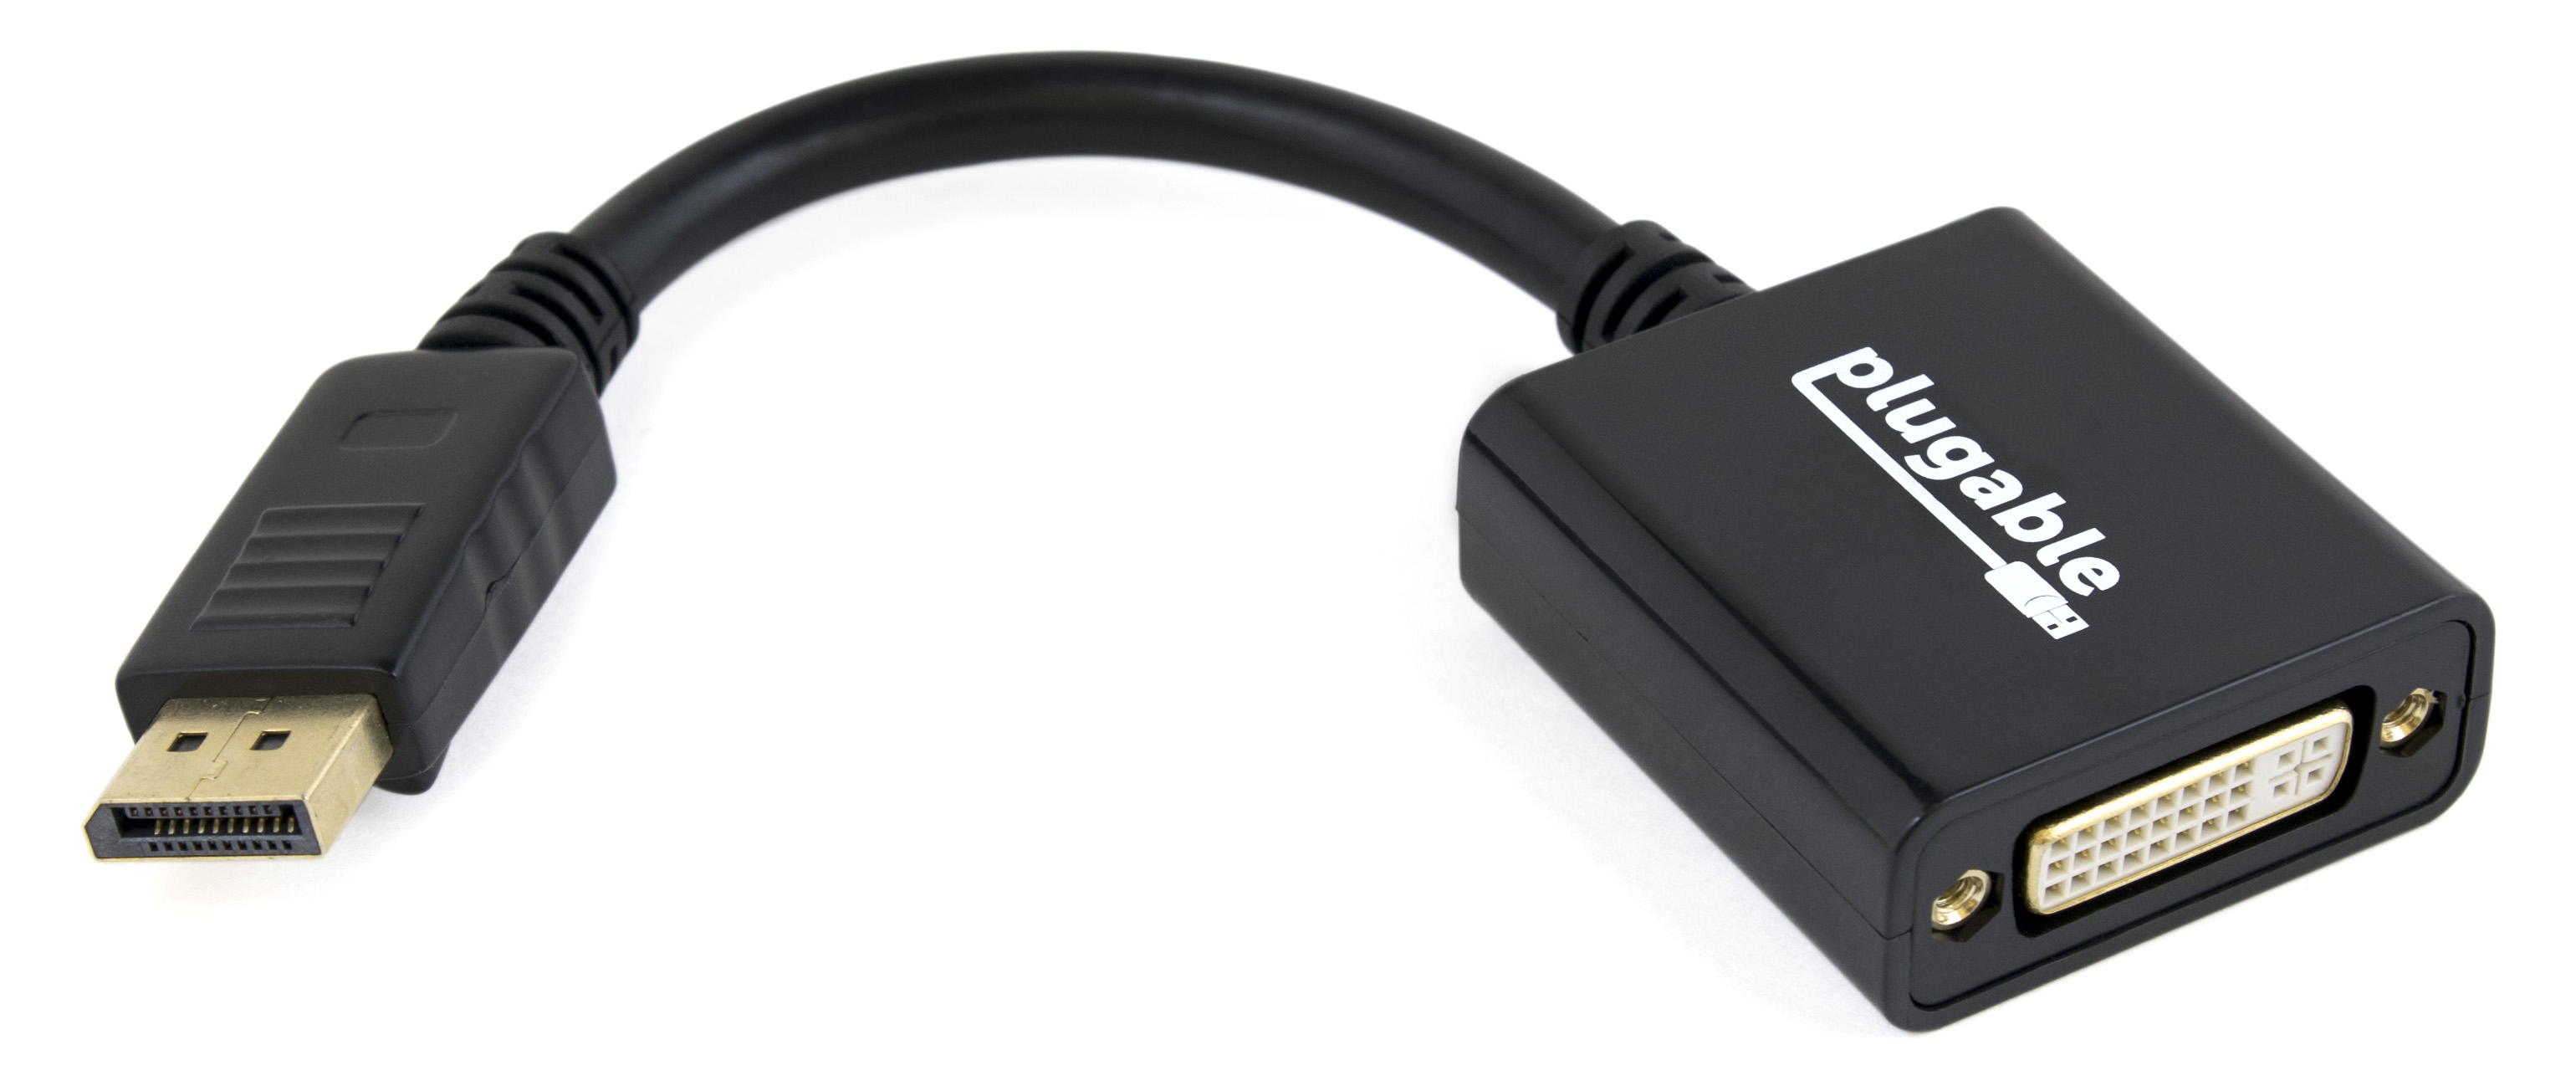 Plugable DisplayPort to DVI Adapter (Supports Windows and Linux Systems and Displays up to 1920x1200@60Hz, Passive) - image 1 of 5